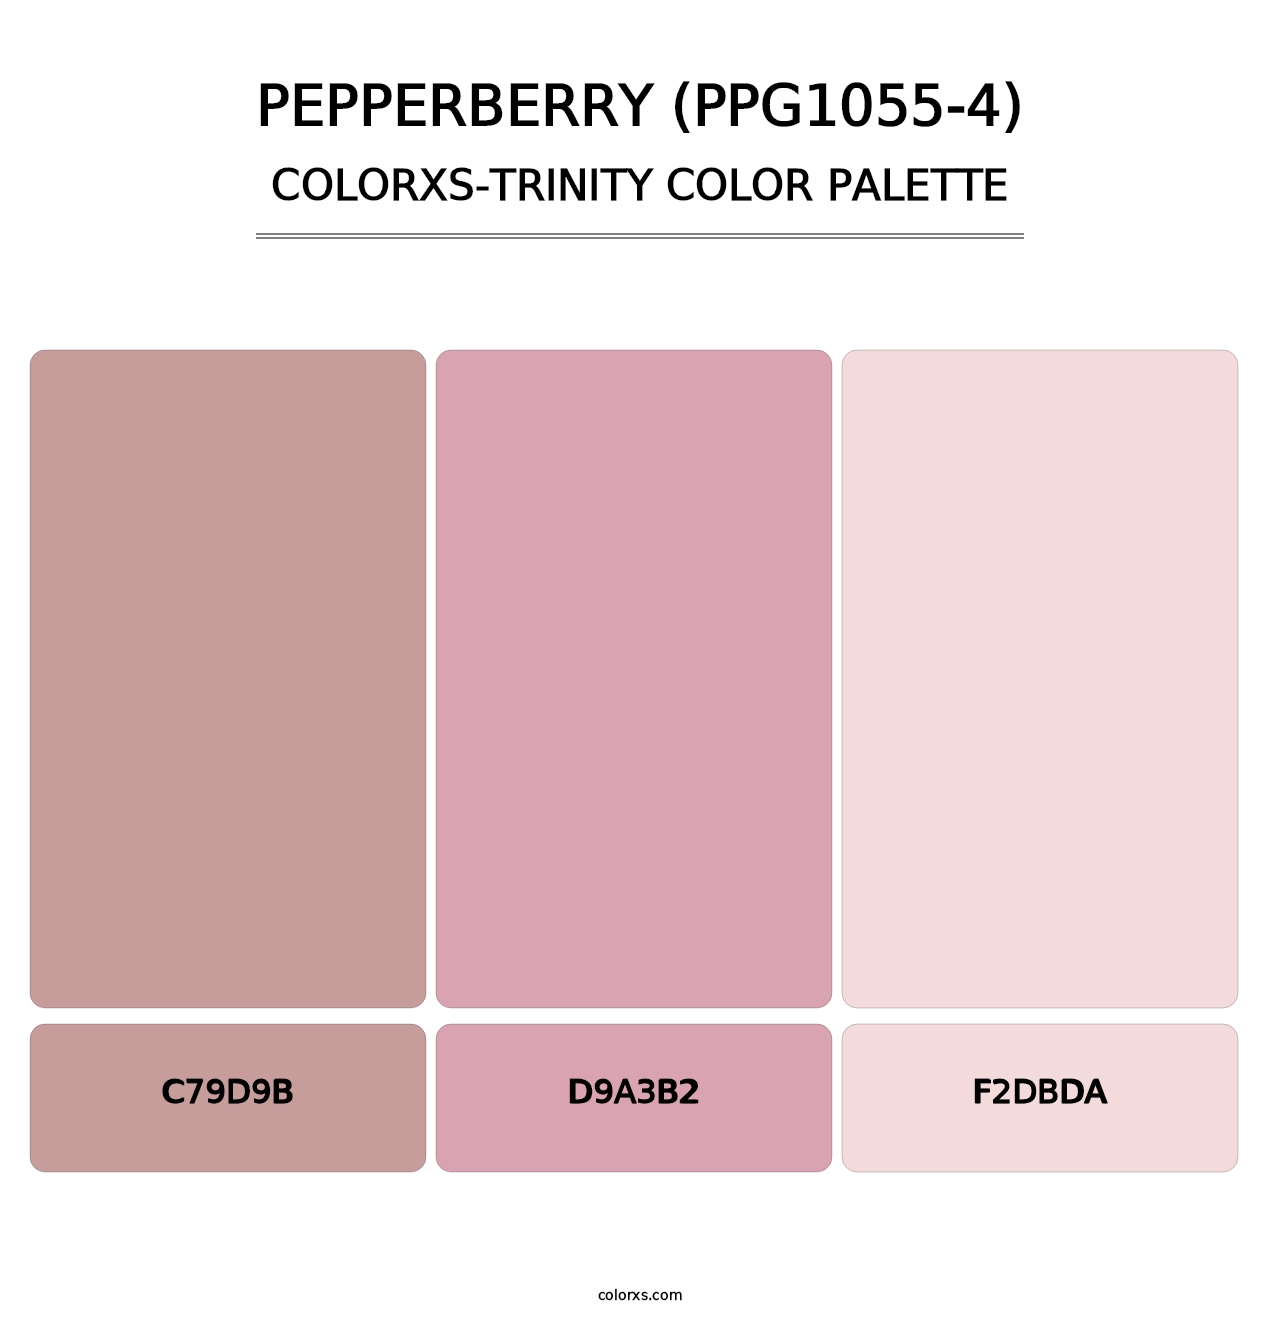 Pepperberry (PPG1055-4) - Colorxs Trinity Palette